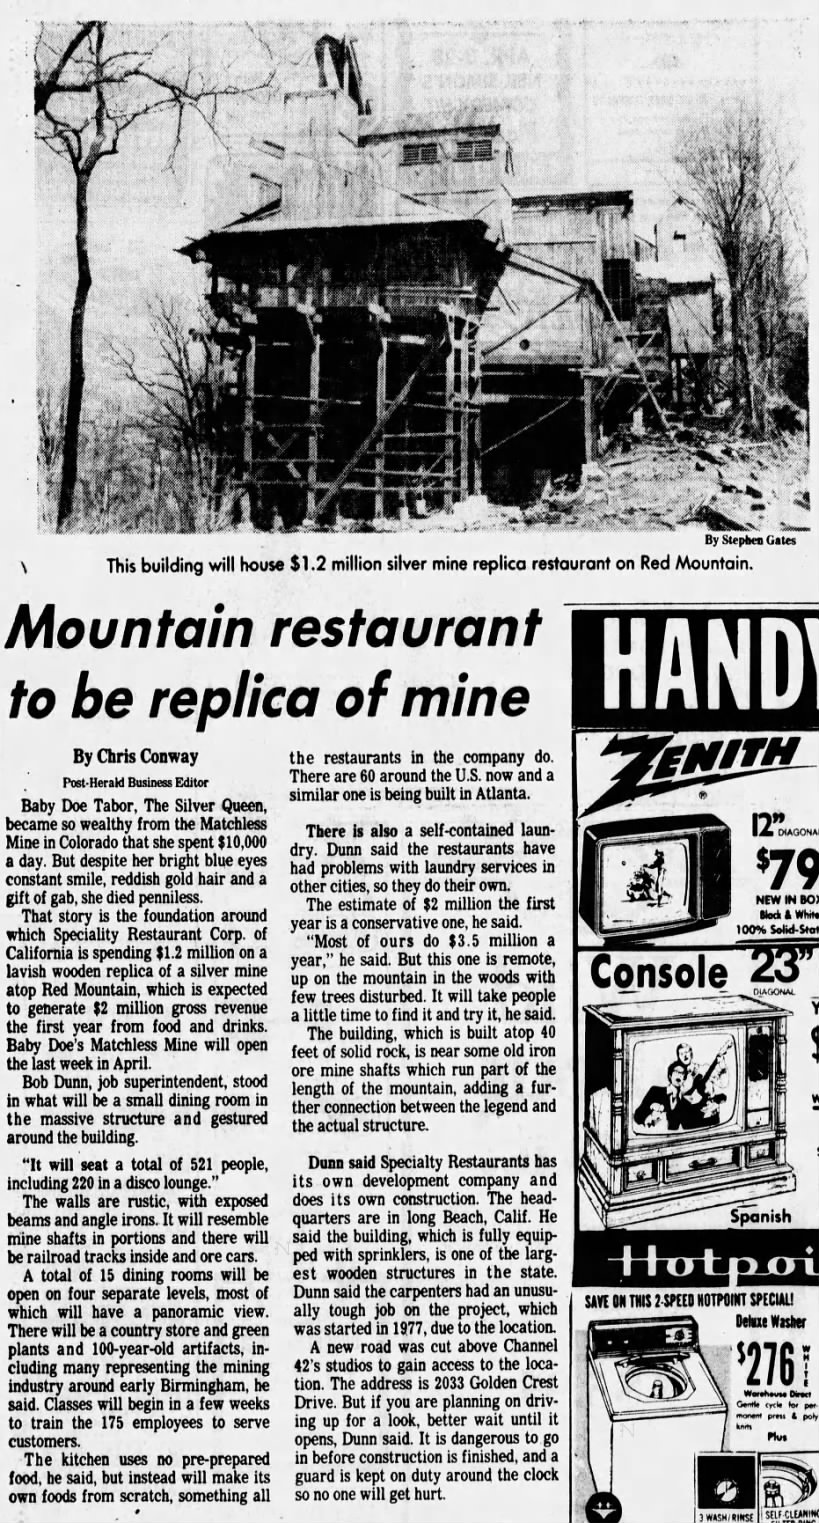 Mountain restaurant to be replica of mine (Baby Doe's Matchless Mine)